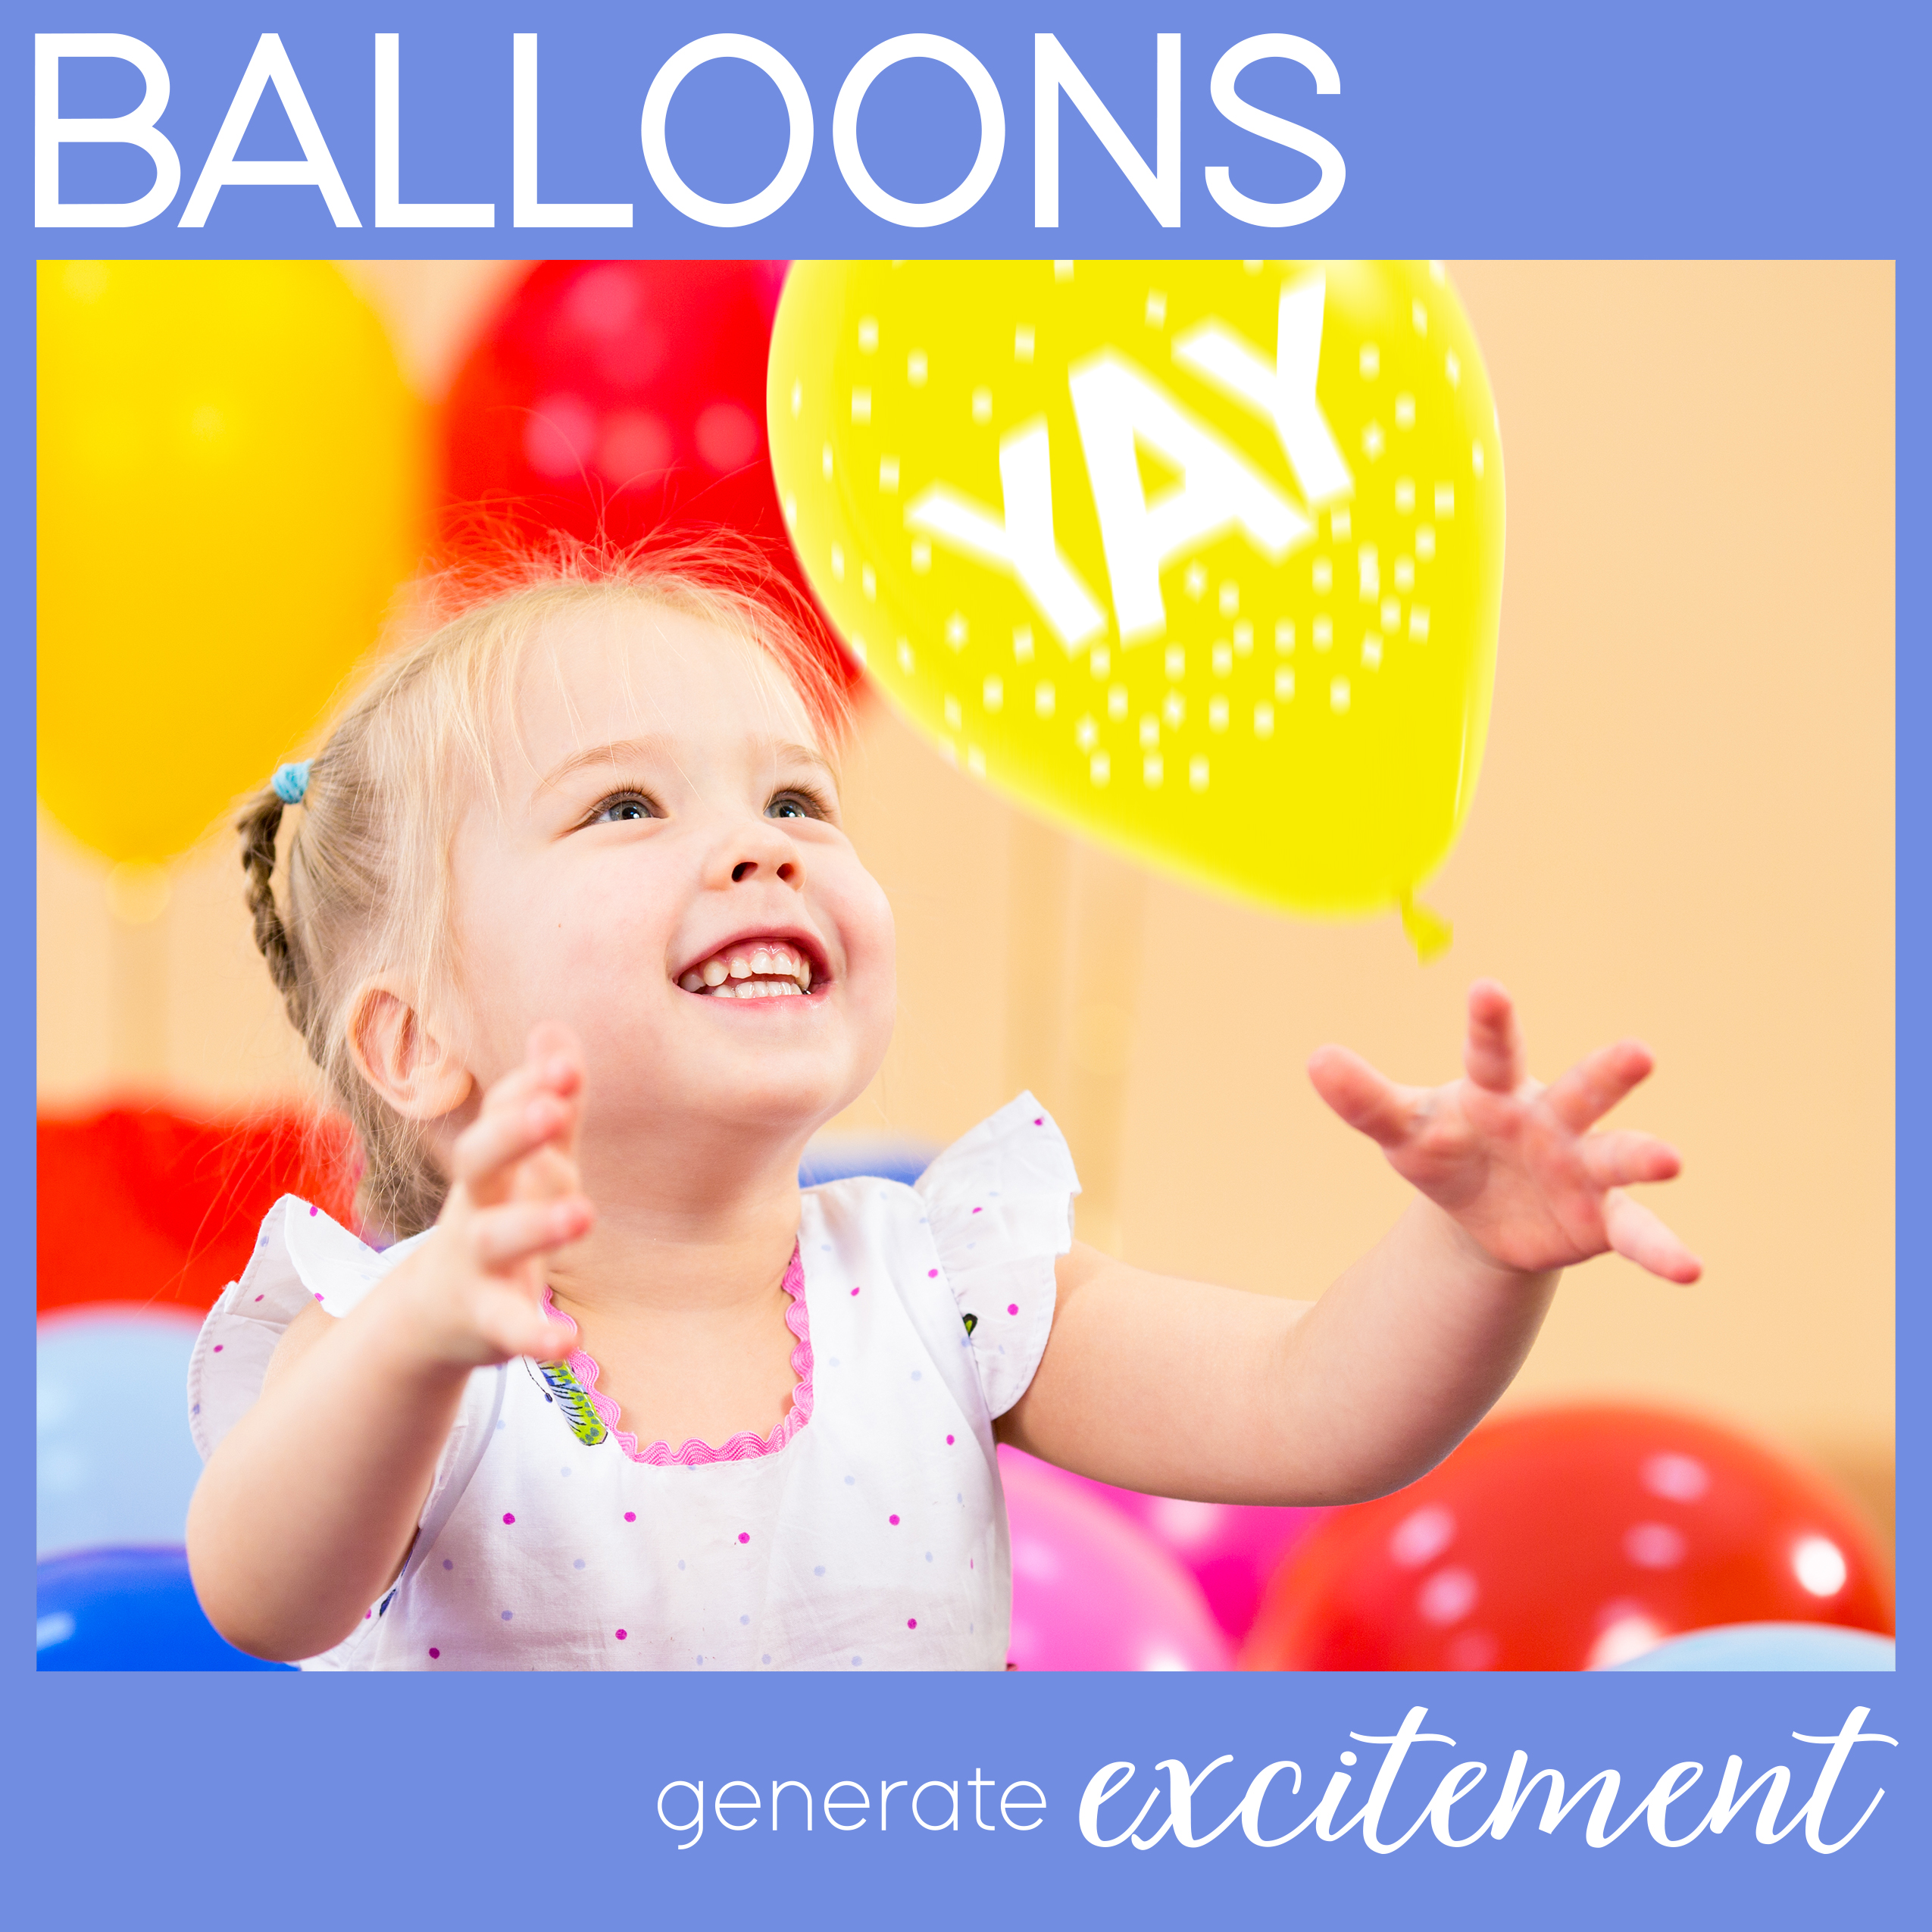 Balloon Facts - Balloons generate excitement